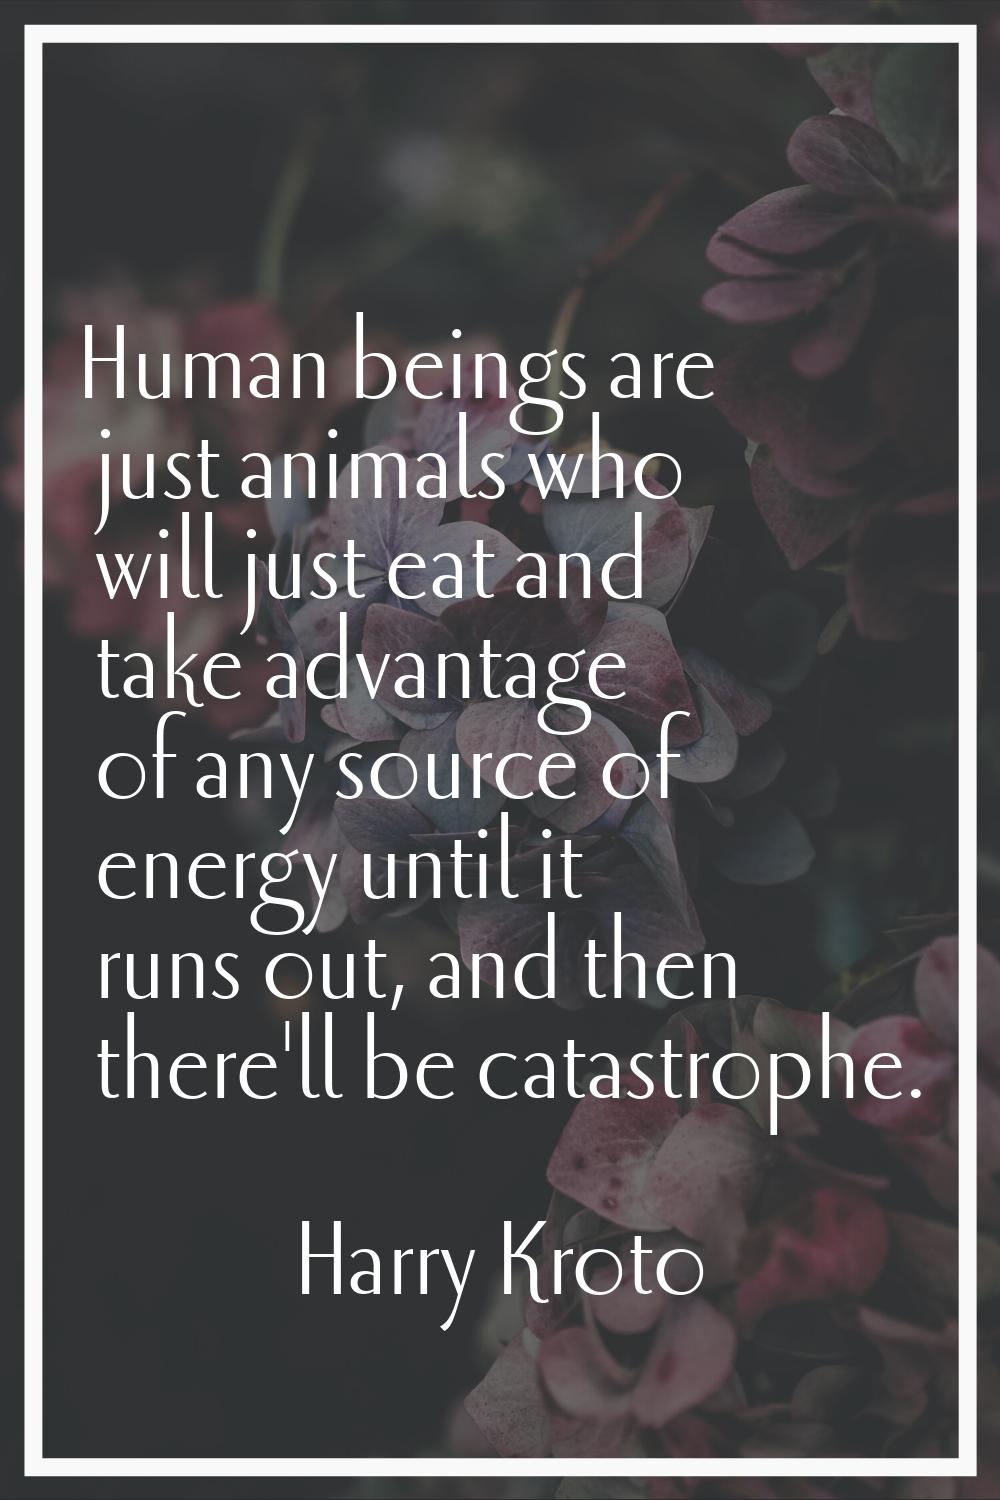 Human beings are just animals who will just eat and take advantage of any source of energy until it